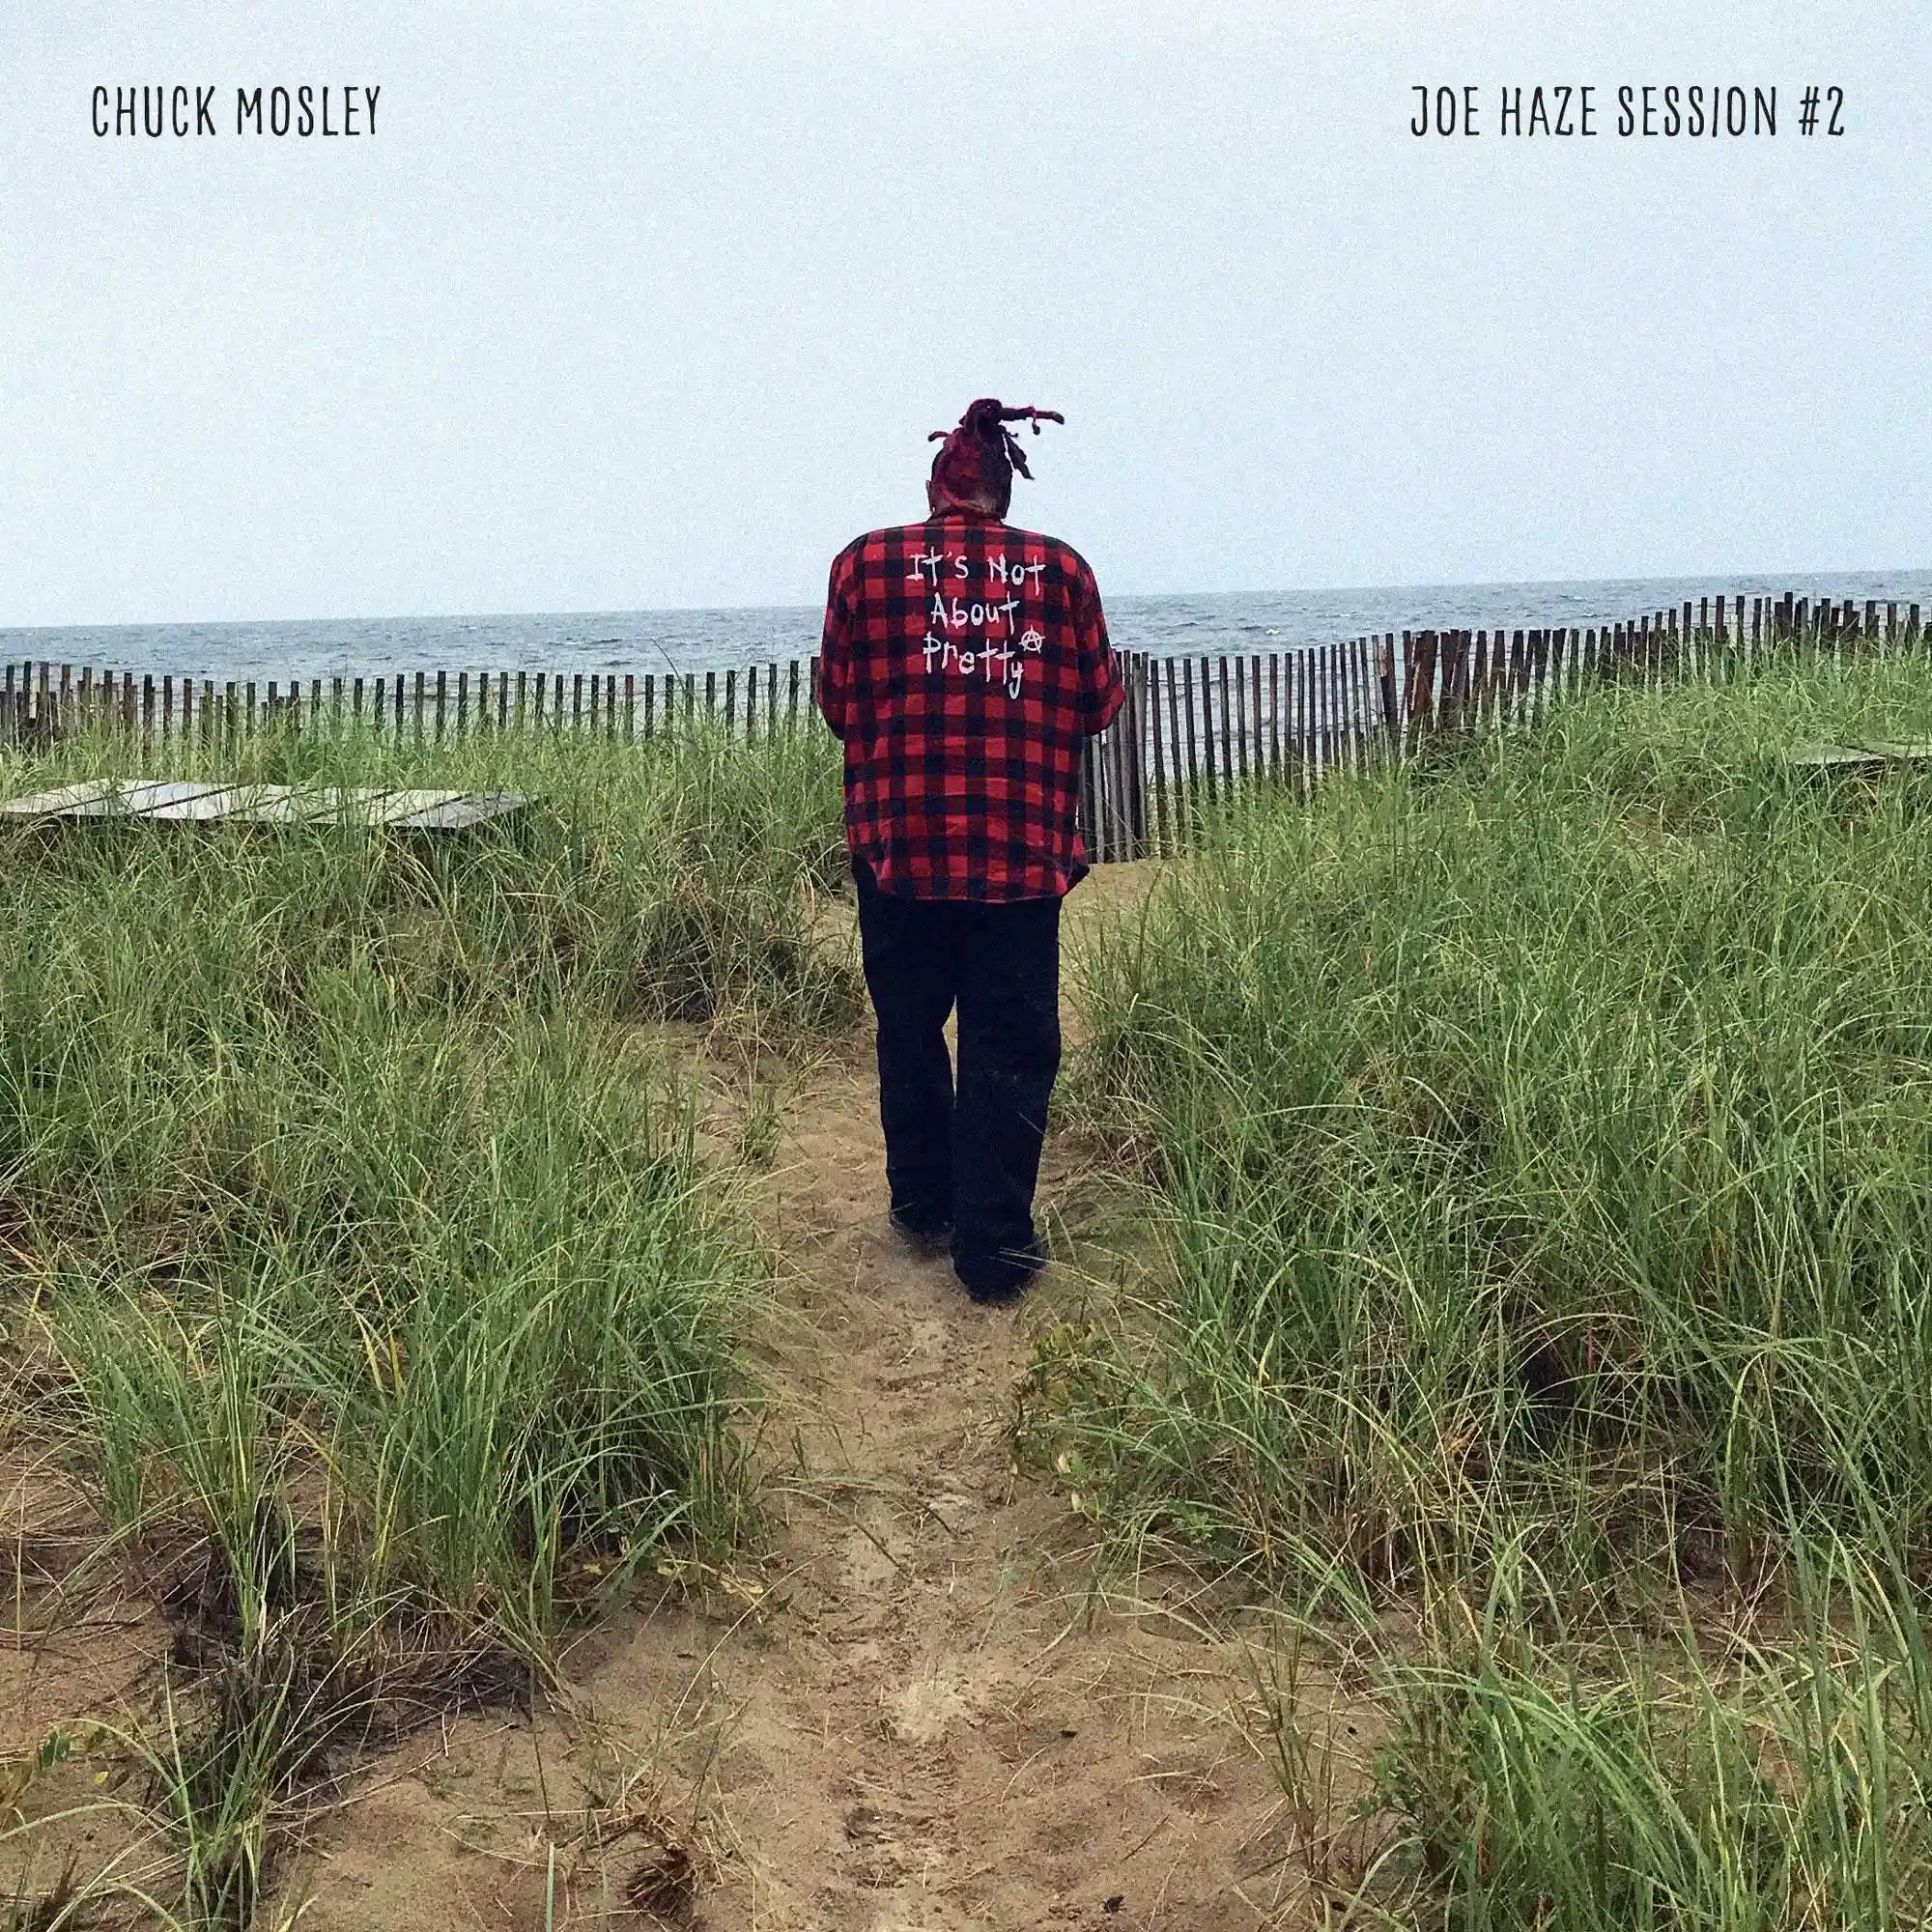 Album cover for “Joe Haze Session #2” by Chuck Mosley